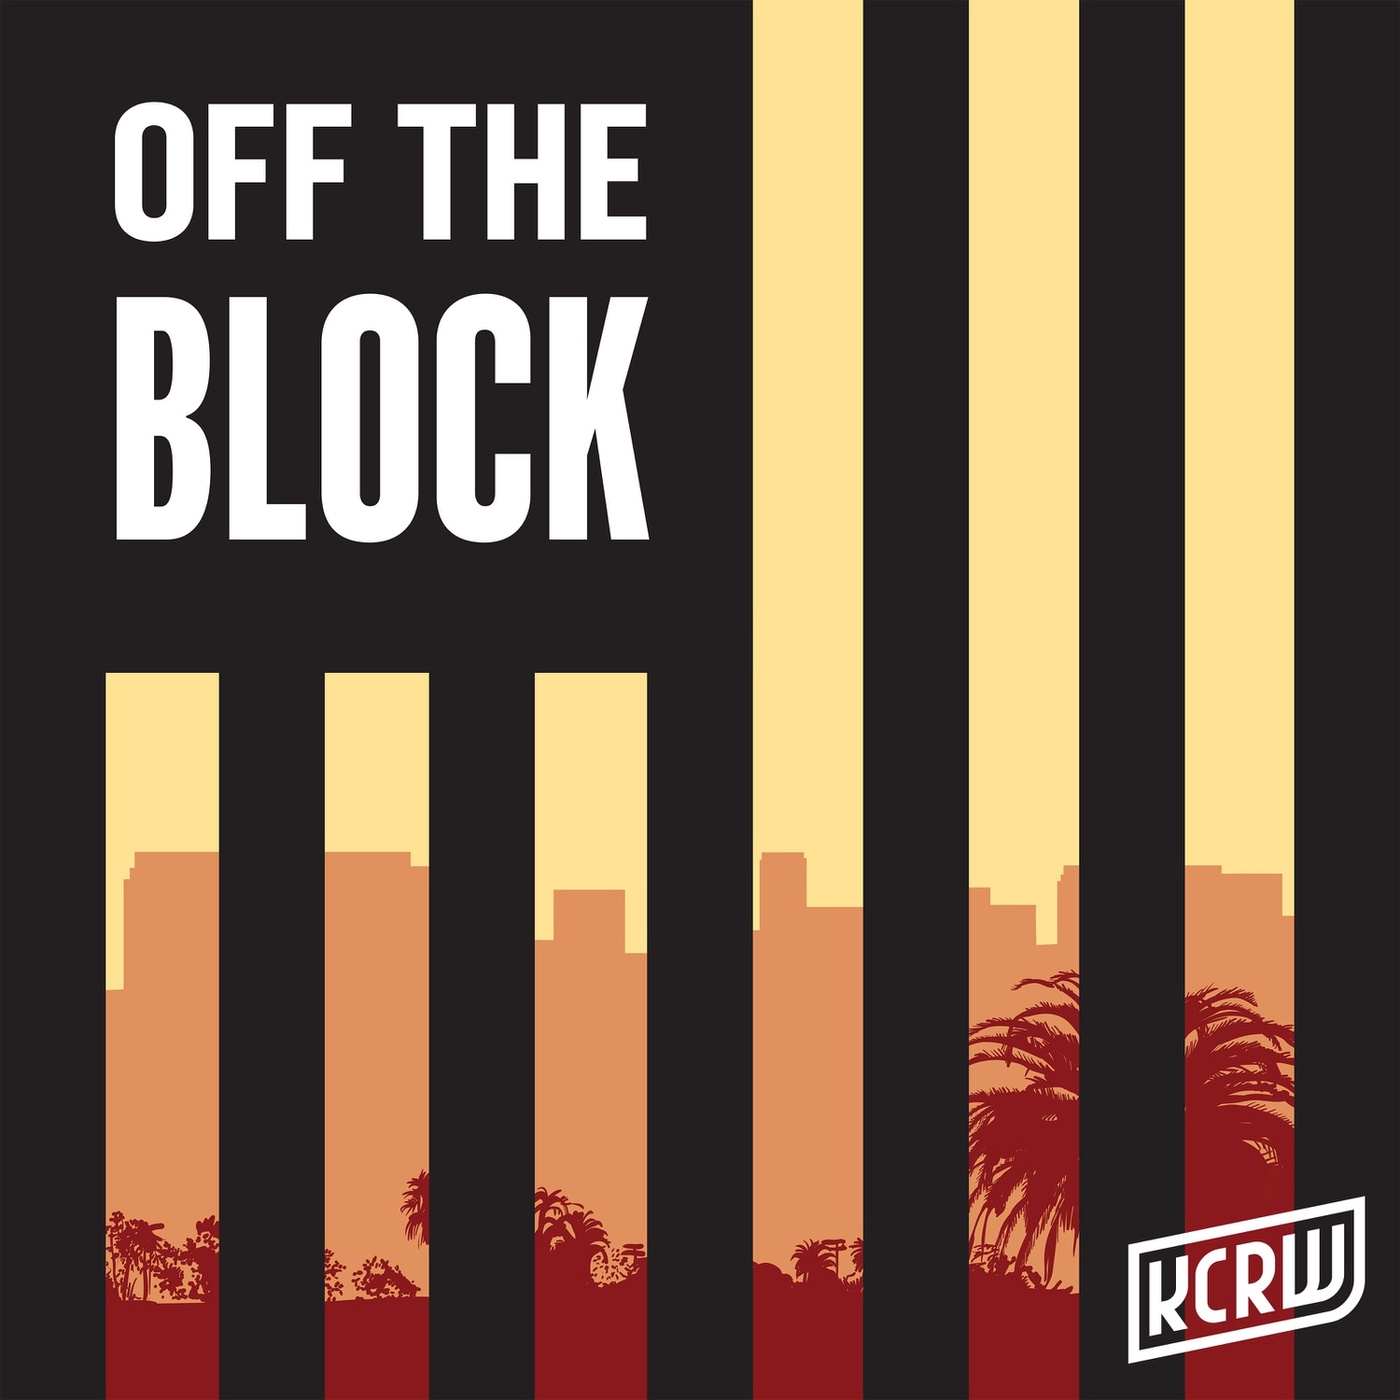 Subscribe now to 'Off the Block'